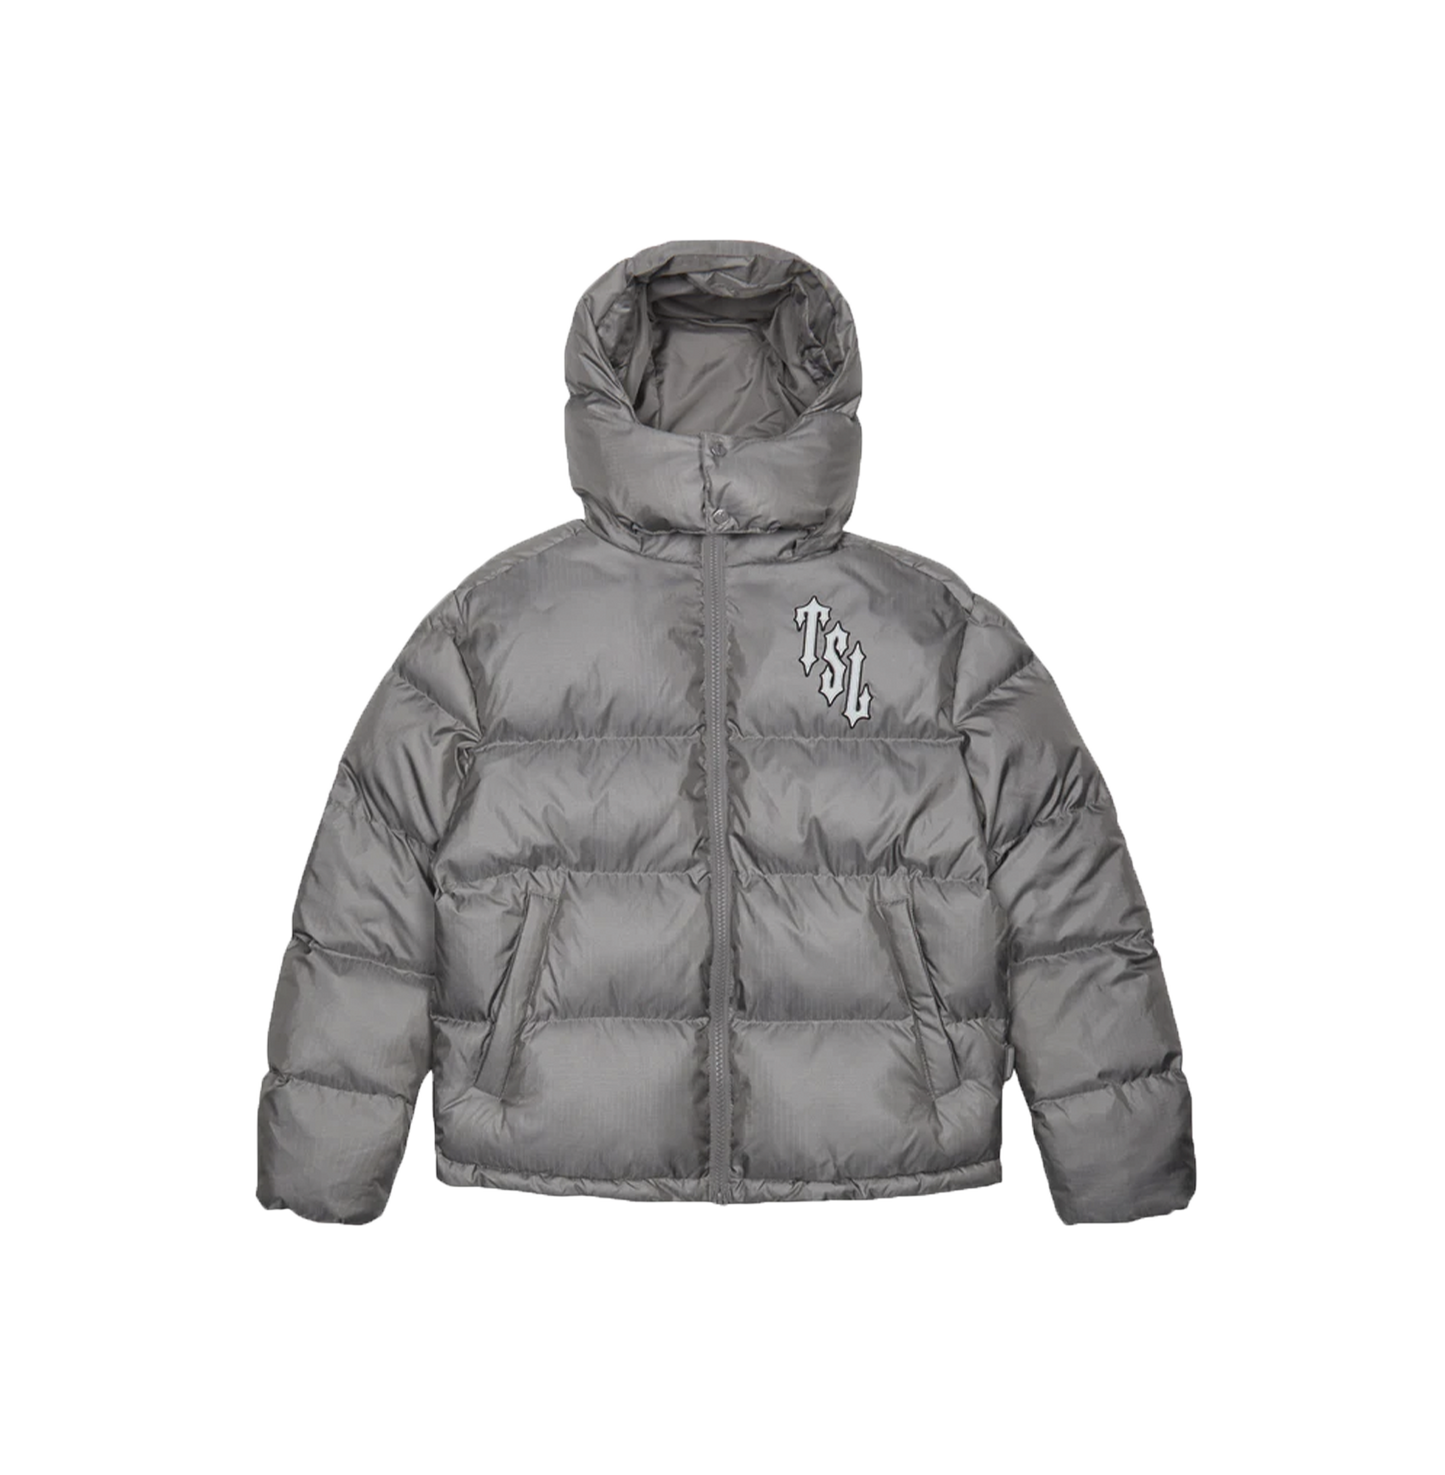 TRAPSTAR SHOOTERS HOODED PUFFER JACKET - GREY REFLECTIVE